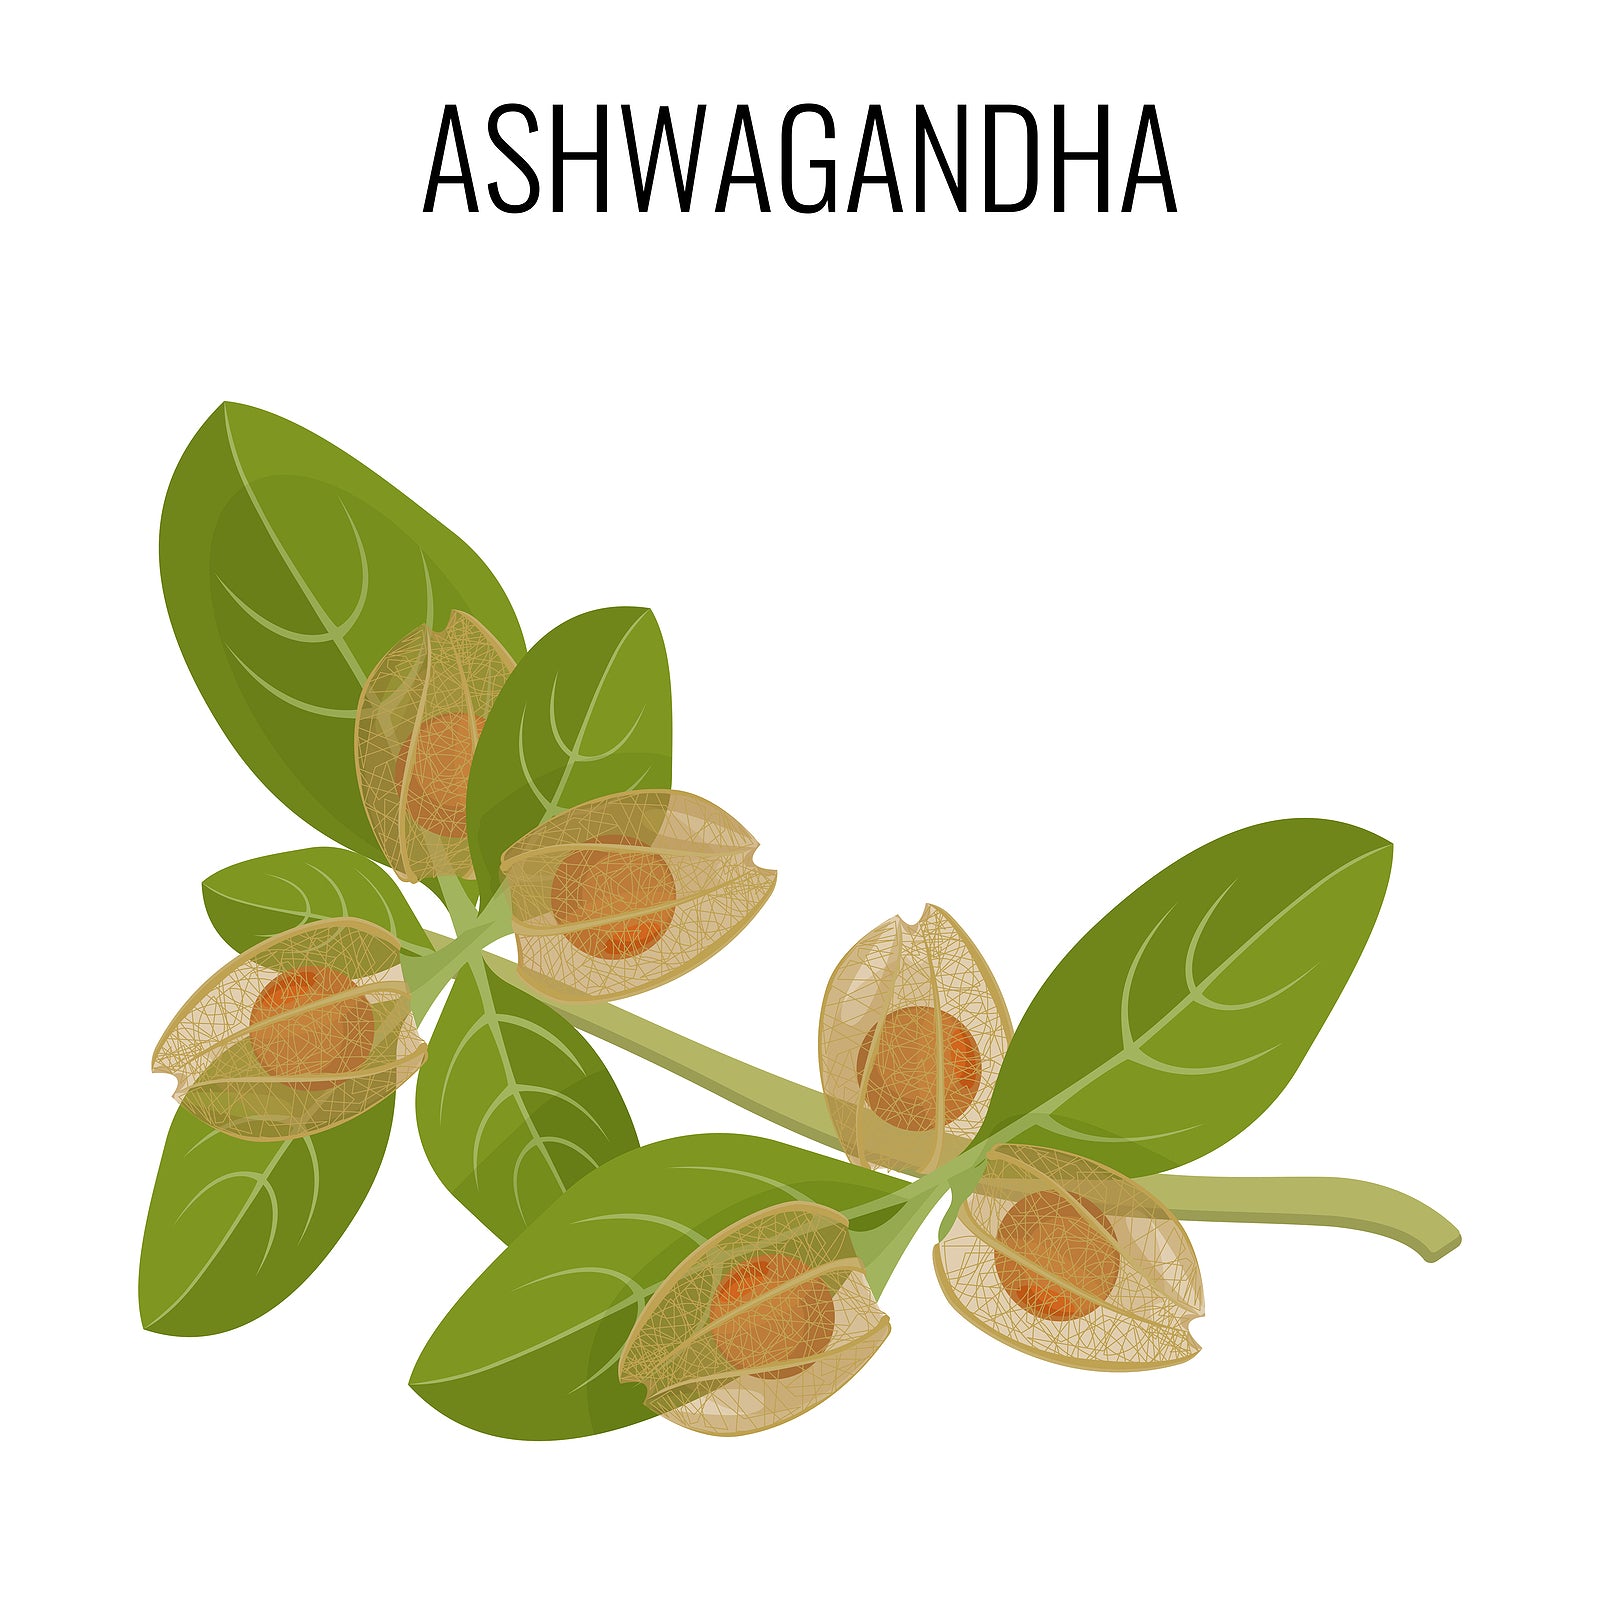 An image of Ashwagandha pictures as the plant isolated on white